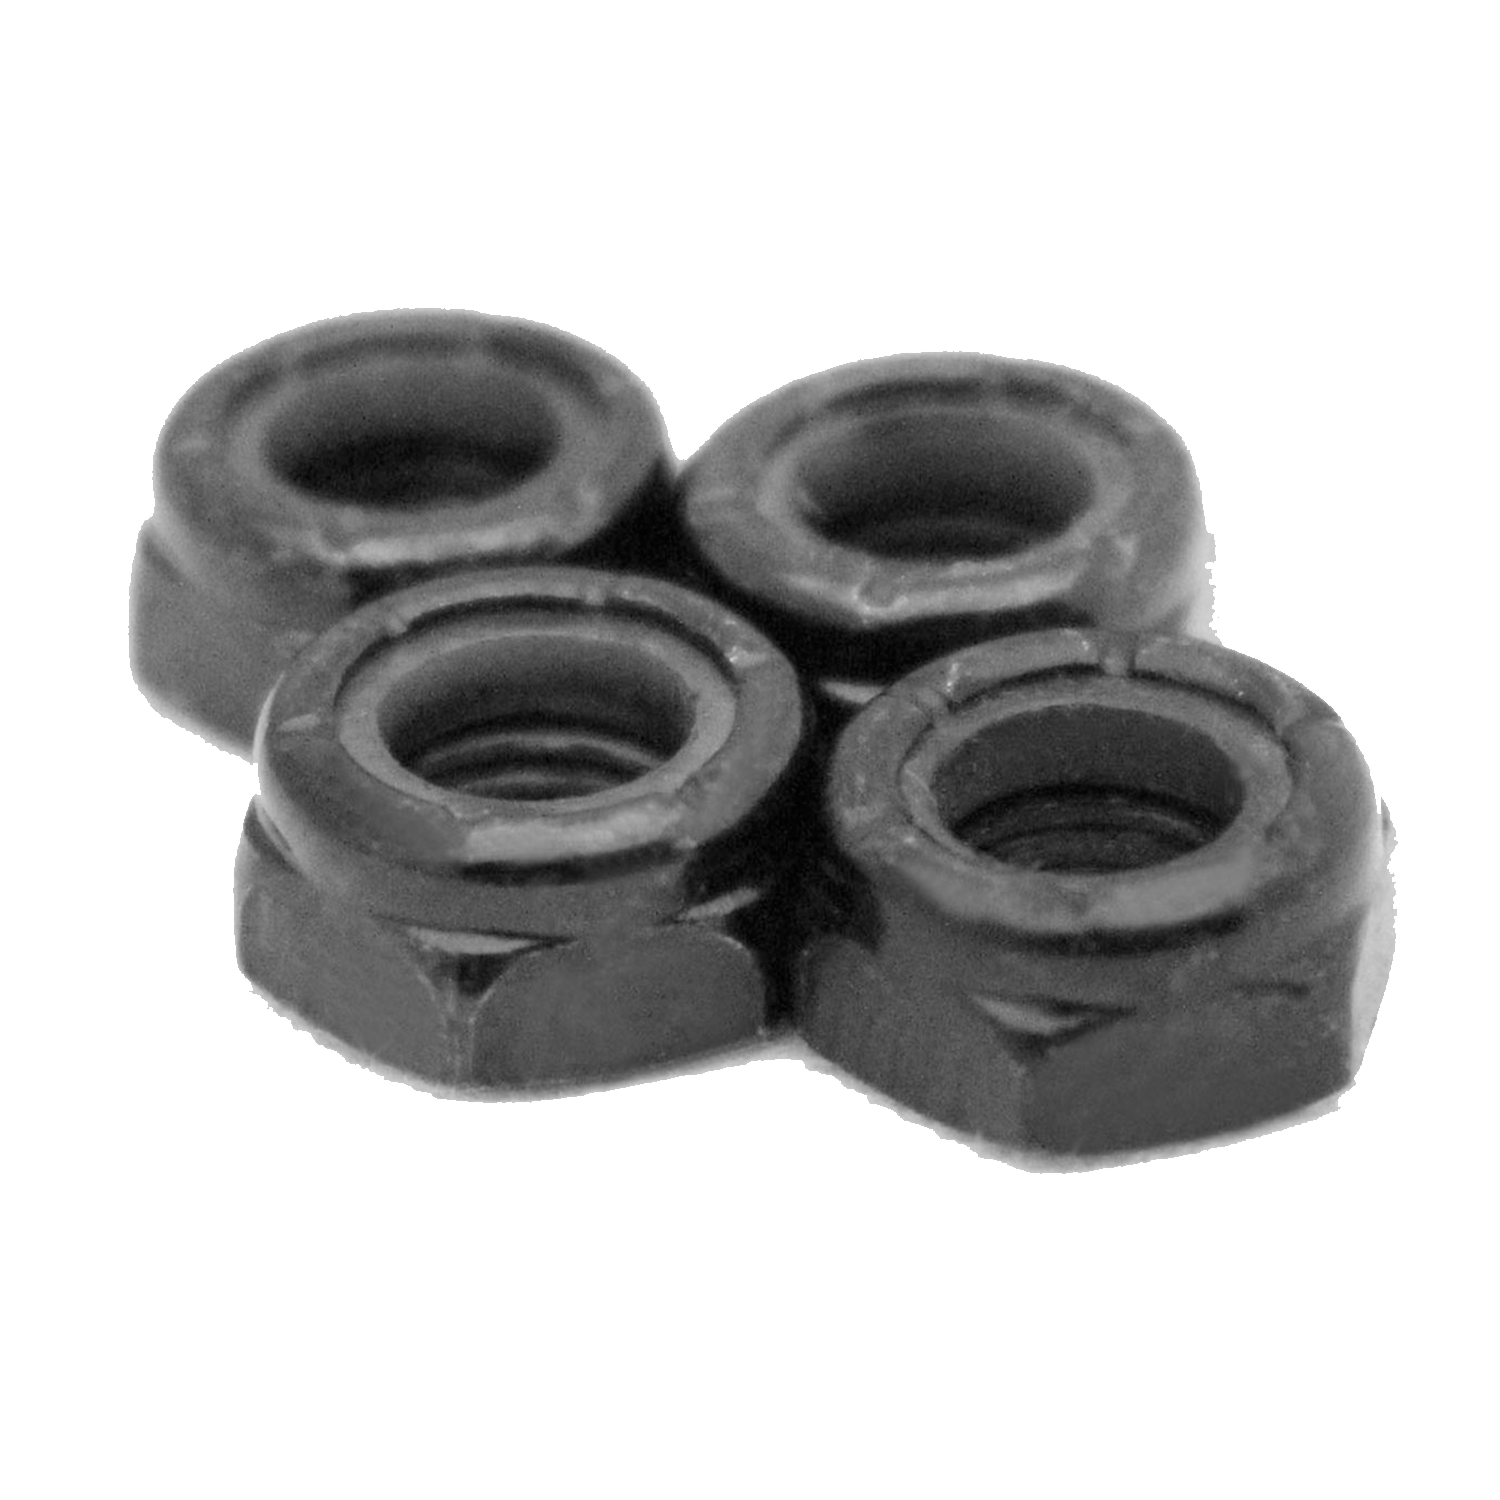 Dime Bag Skateboard Hardware Replacement Axle Nuts 4 Pack